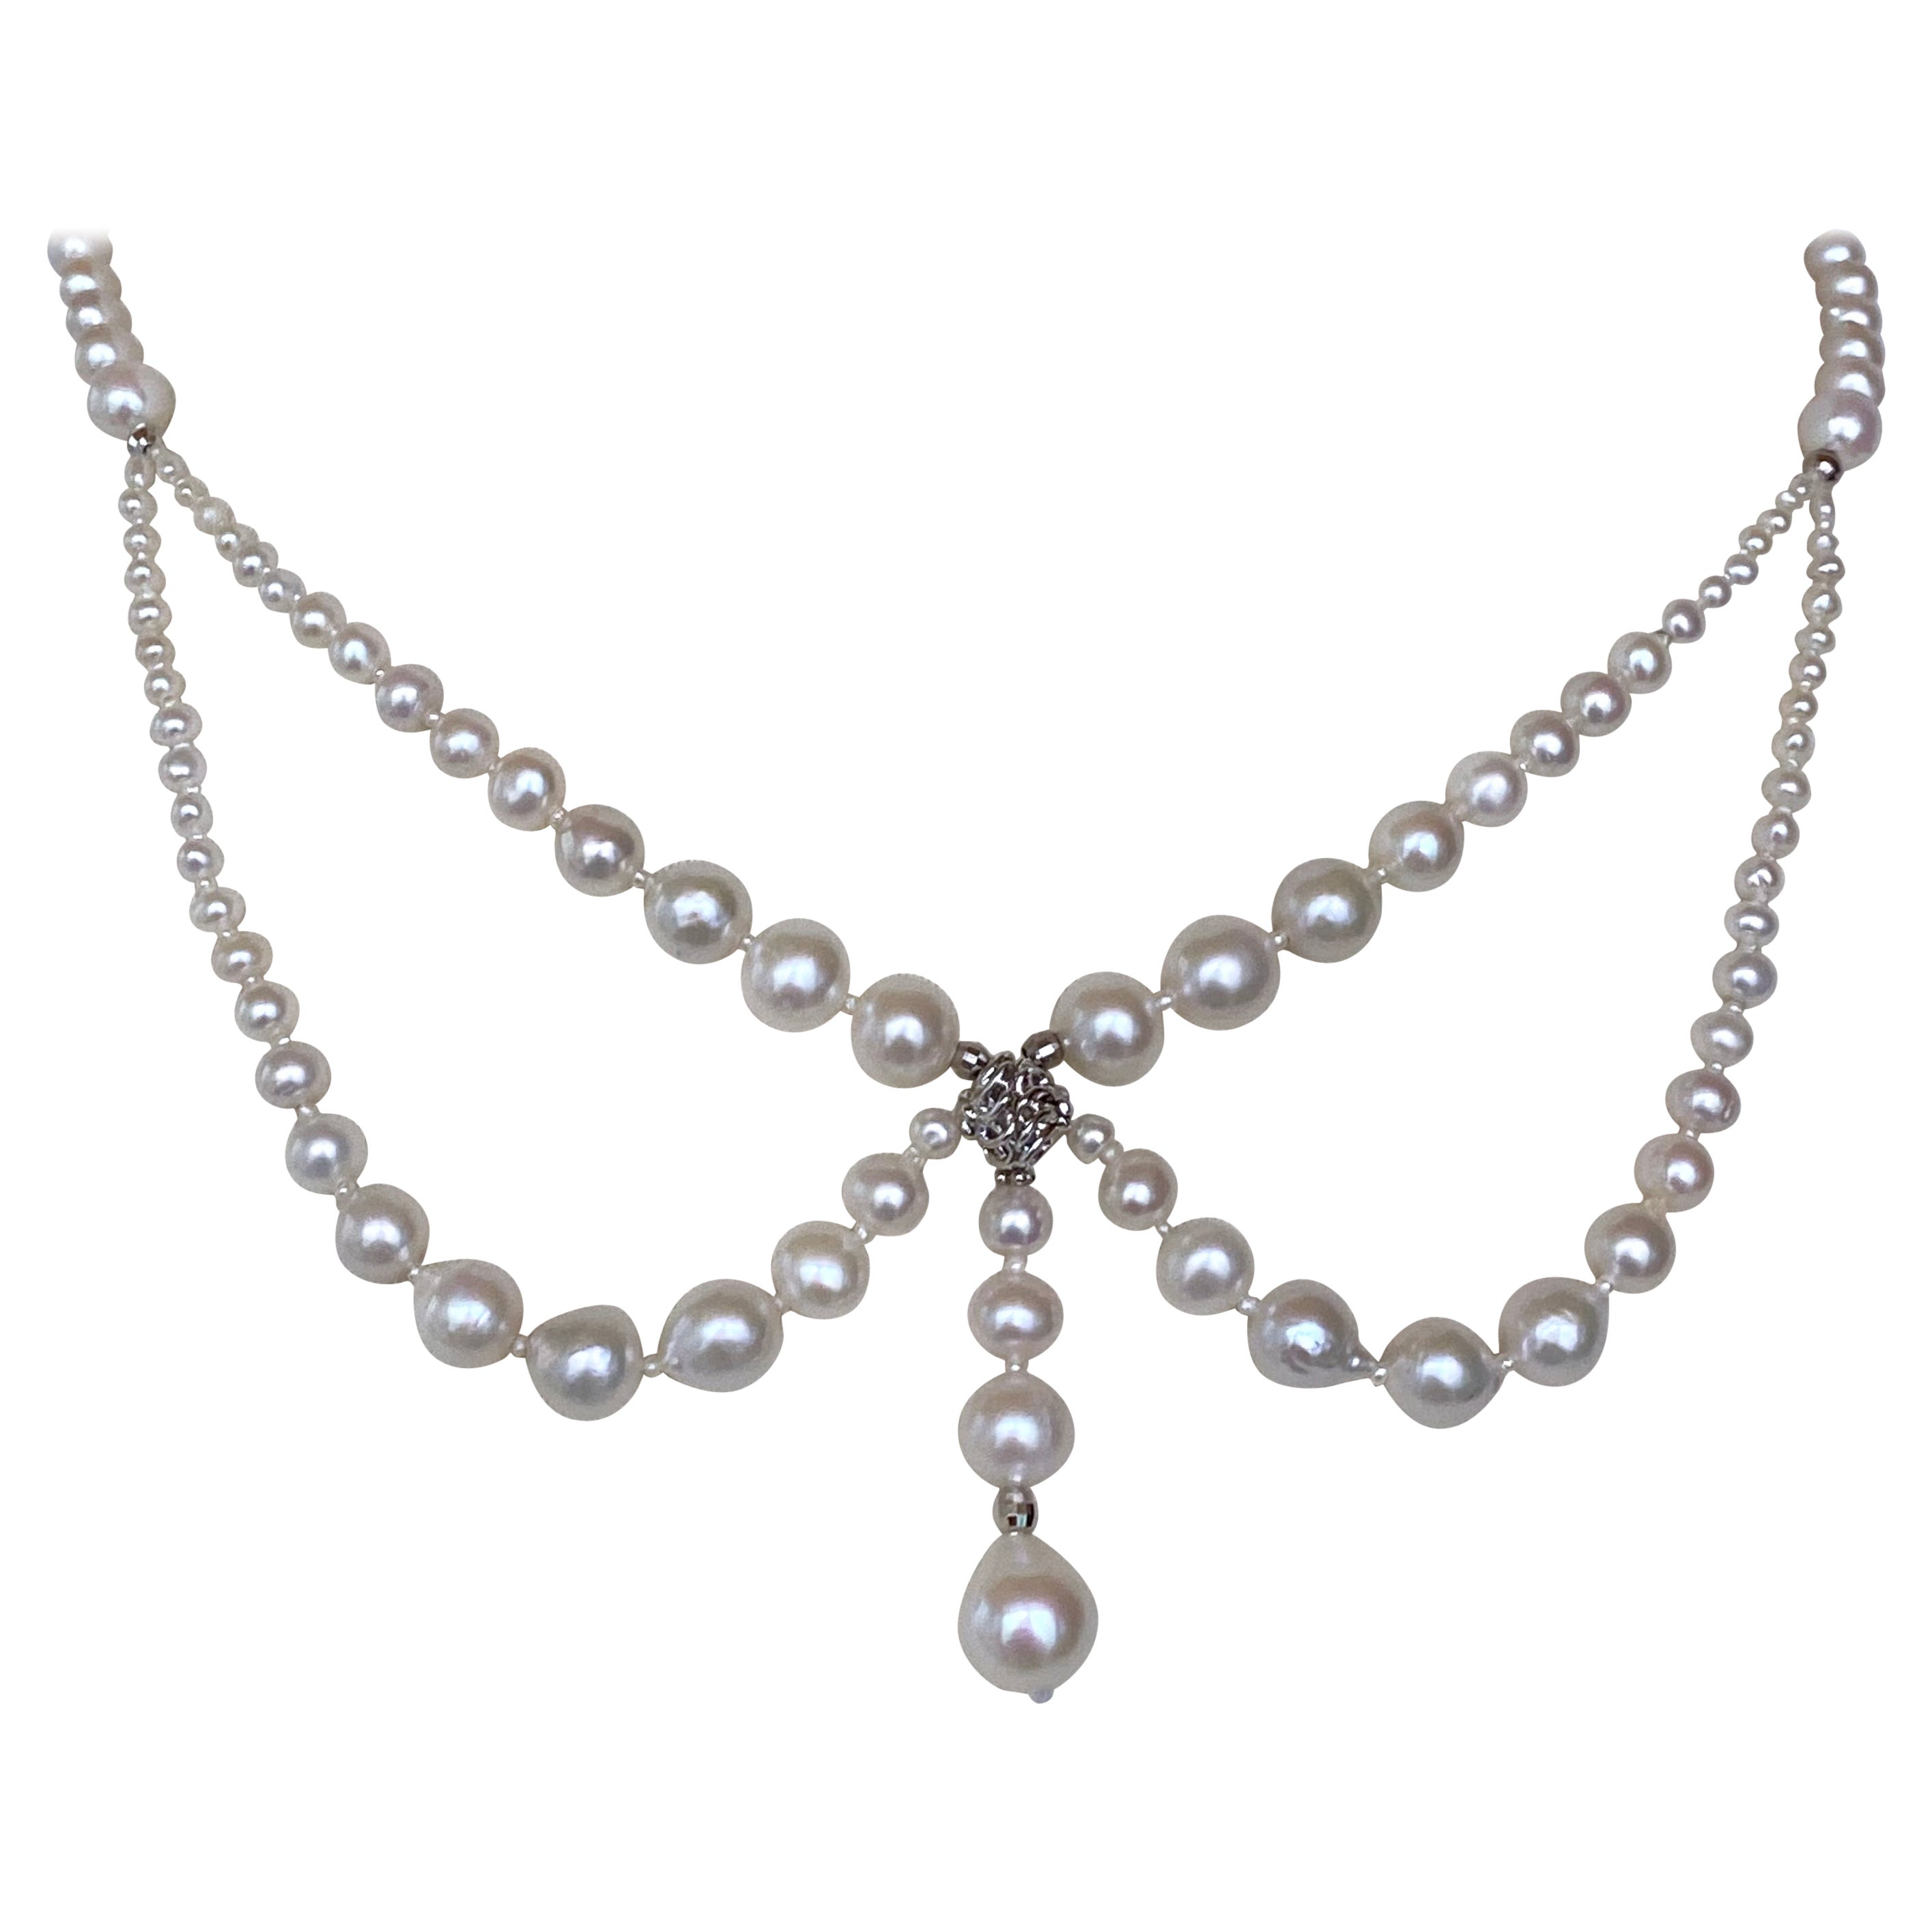 Marina J. Victorian Inspired Draped Pearl and Silver Rhodium PlatedNecklace For Sale